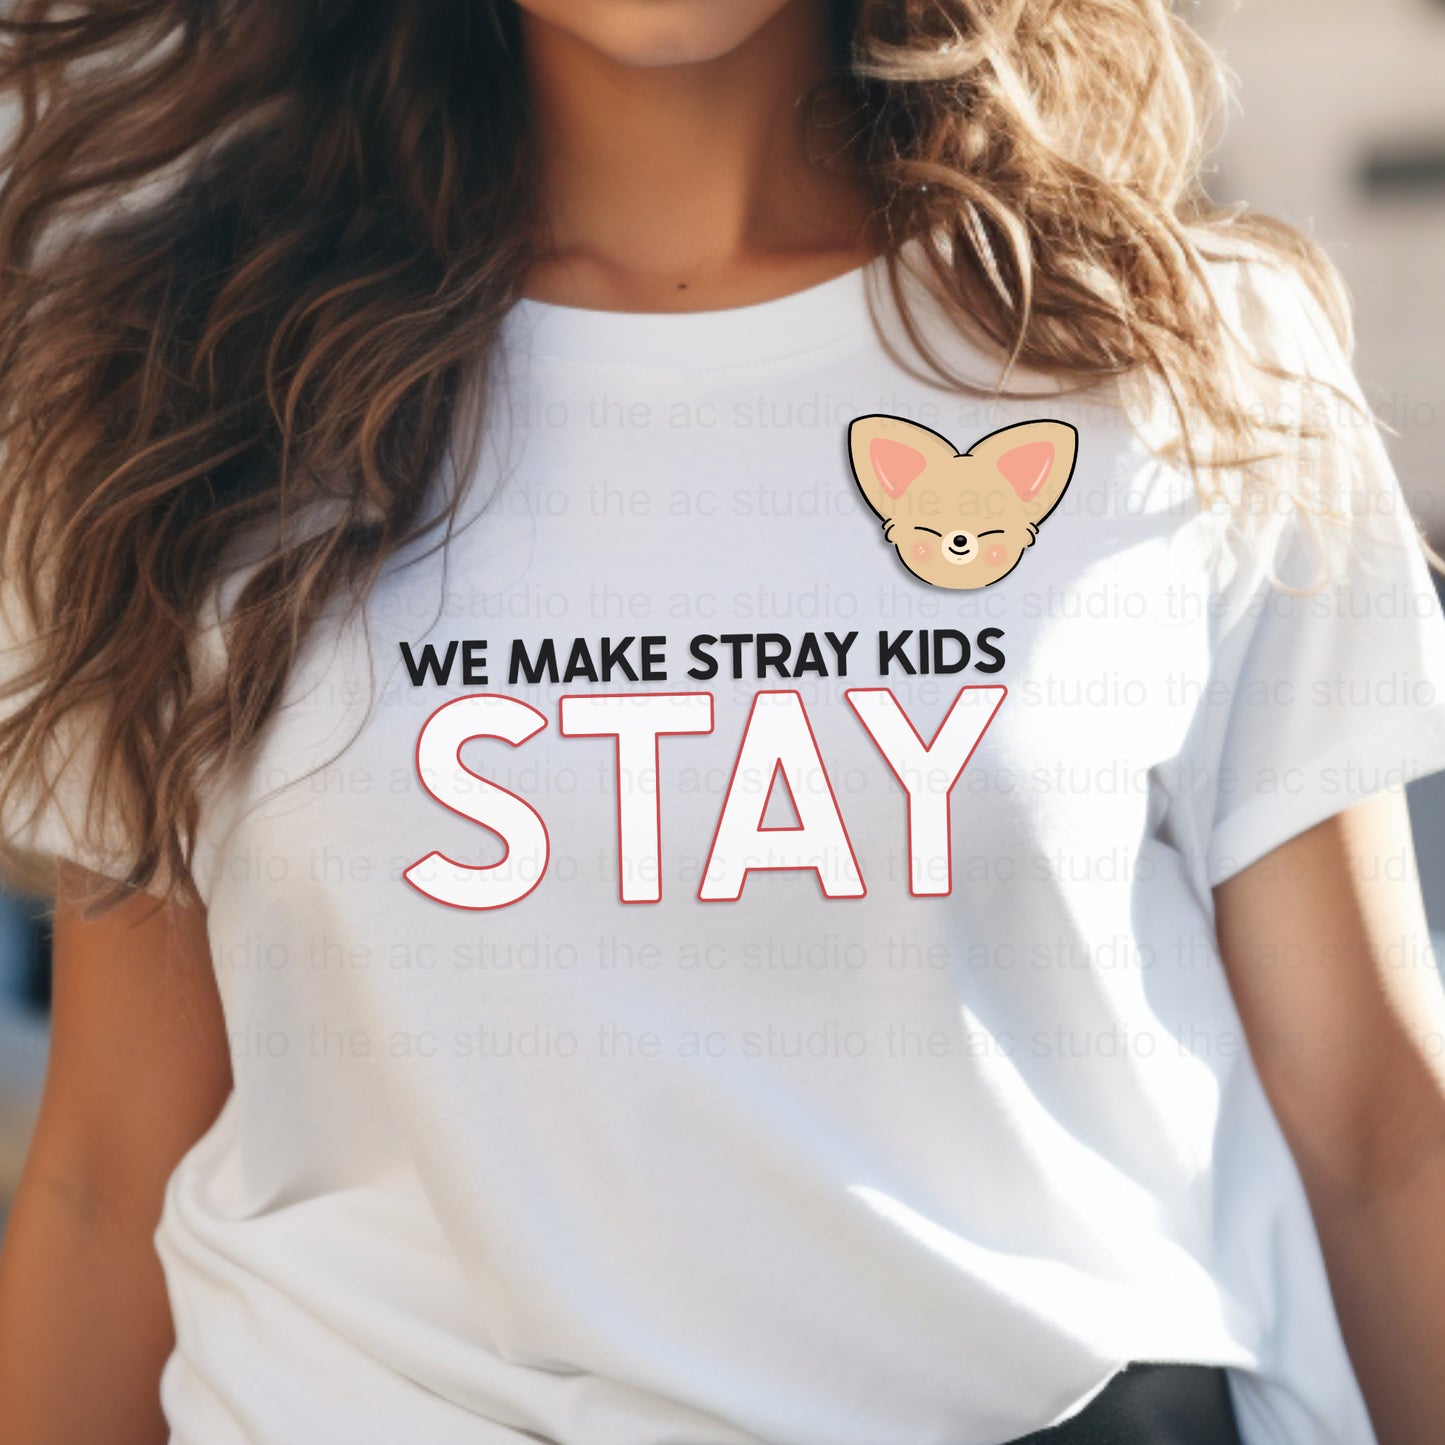 STAY - We Make SK Stay T-Shirt (White)